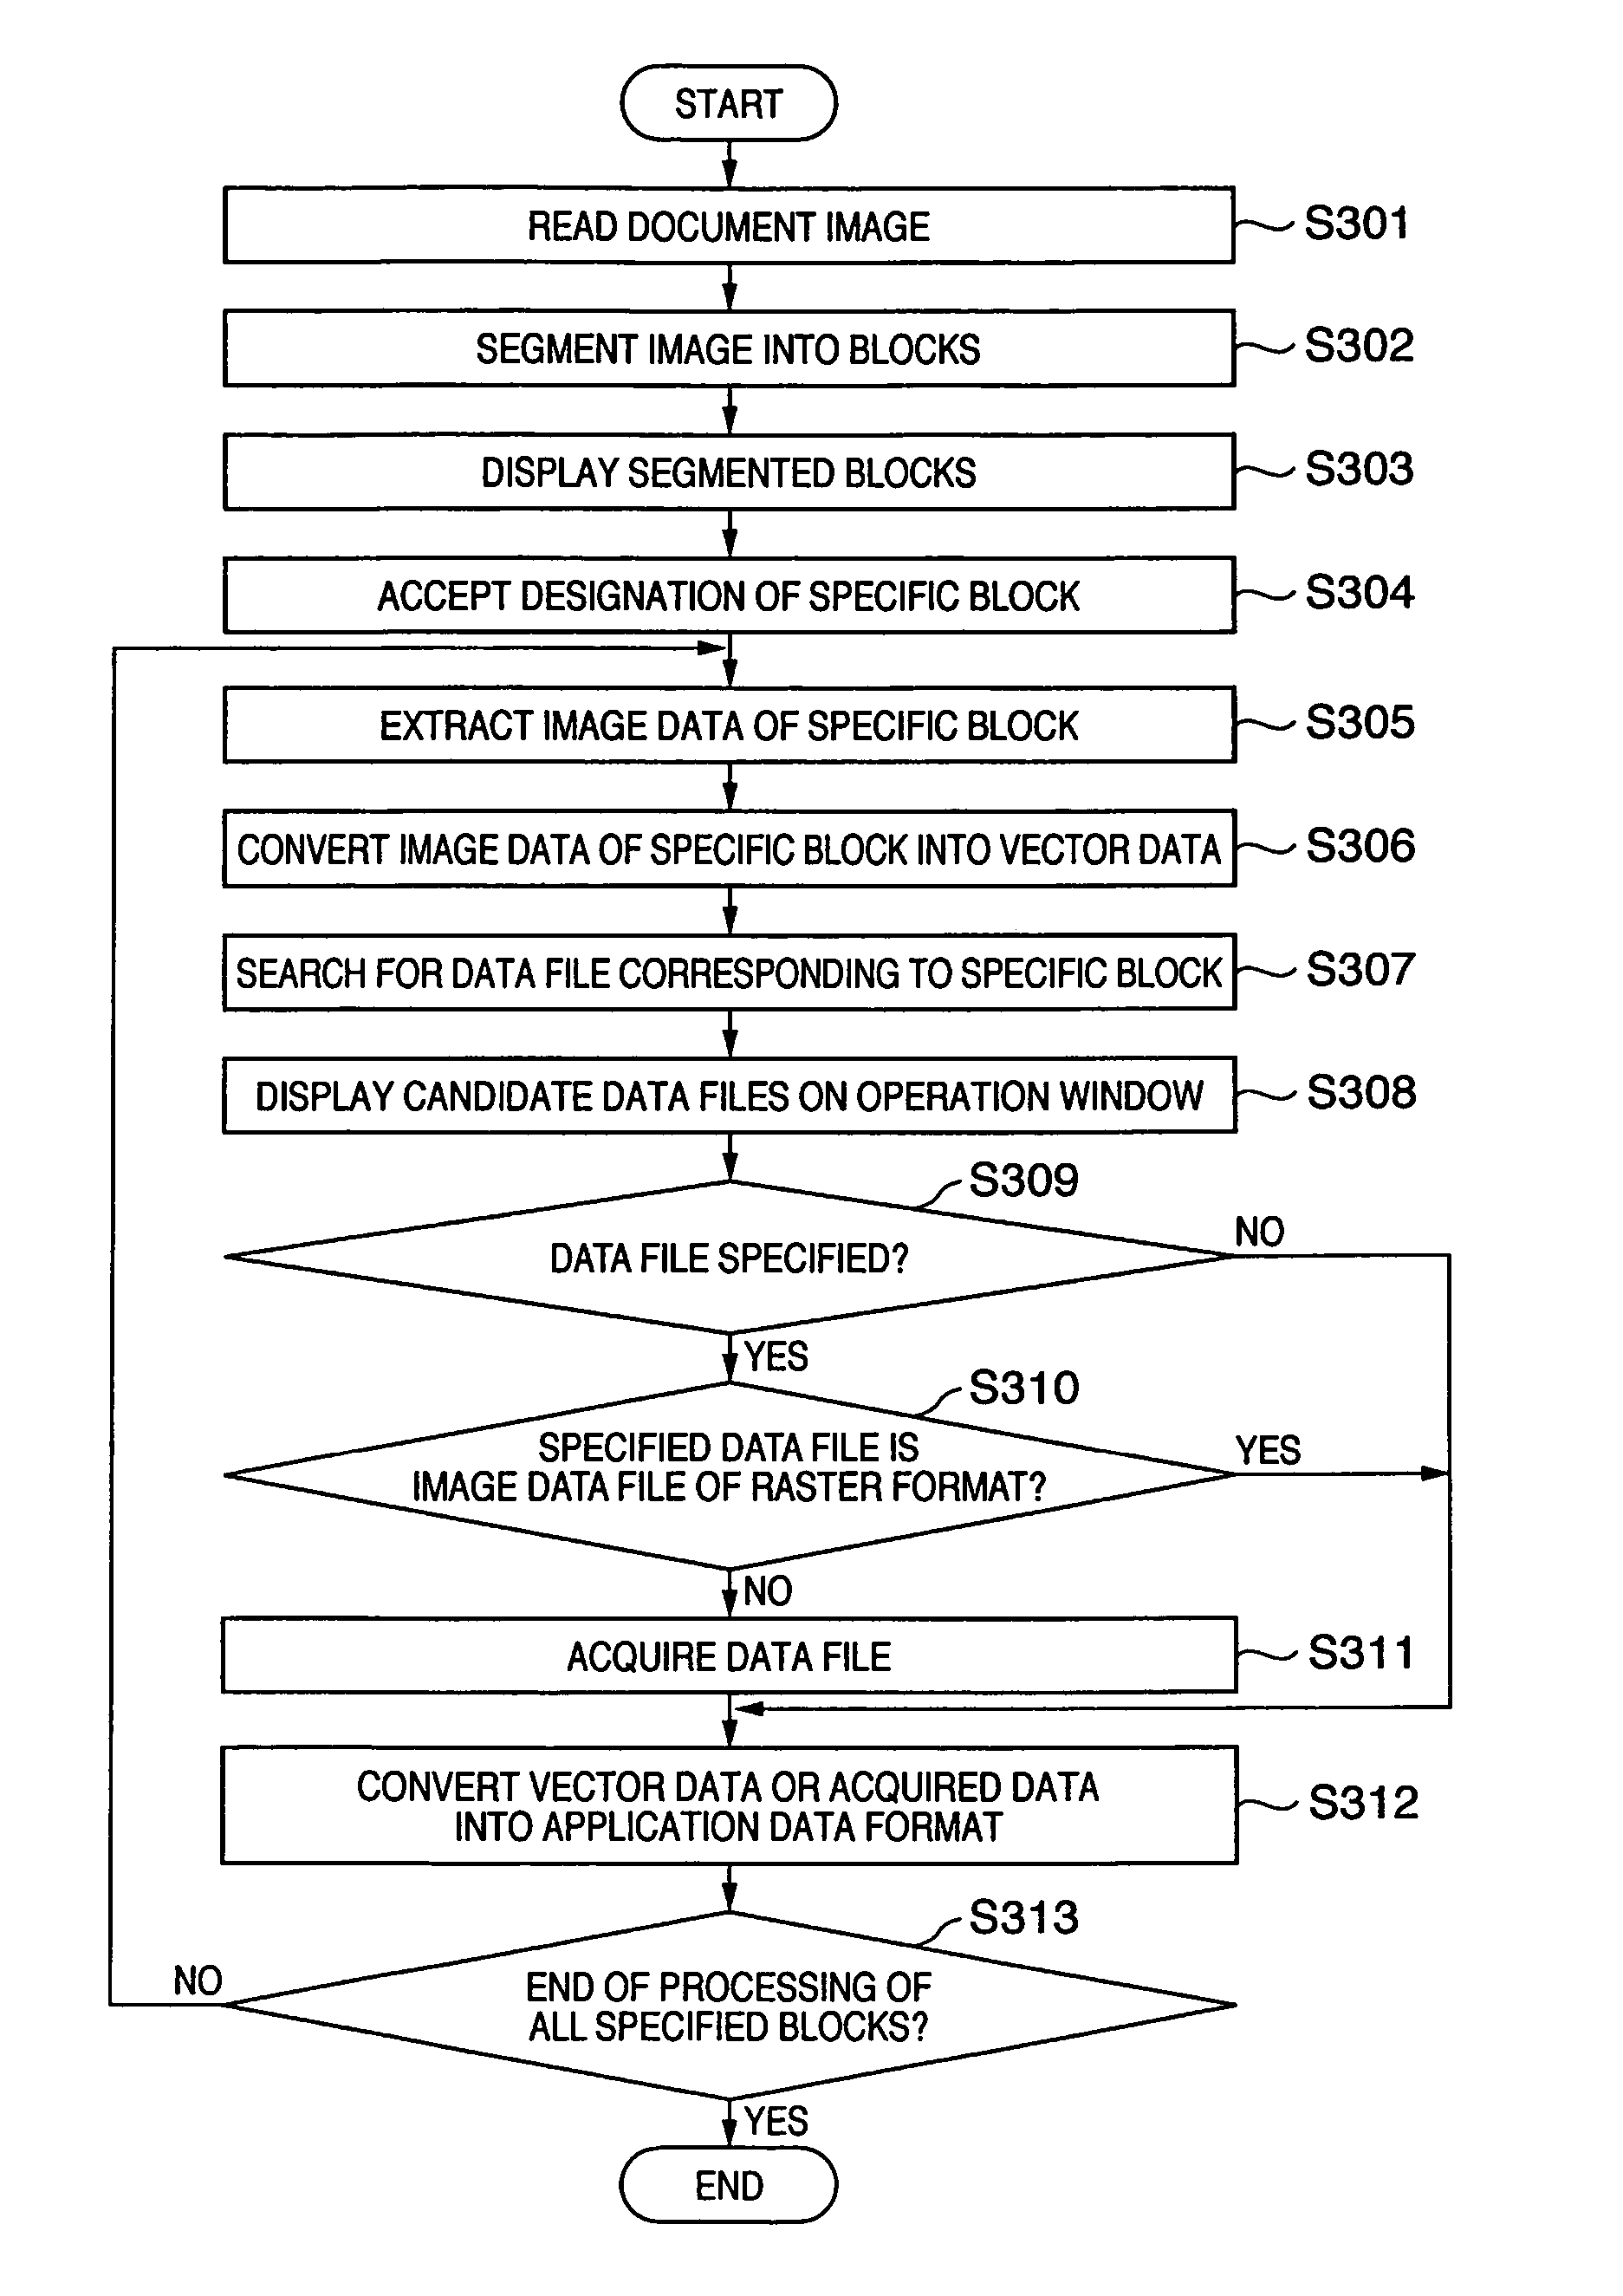 Image processing apparatus, method thereof, and its control method